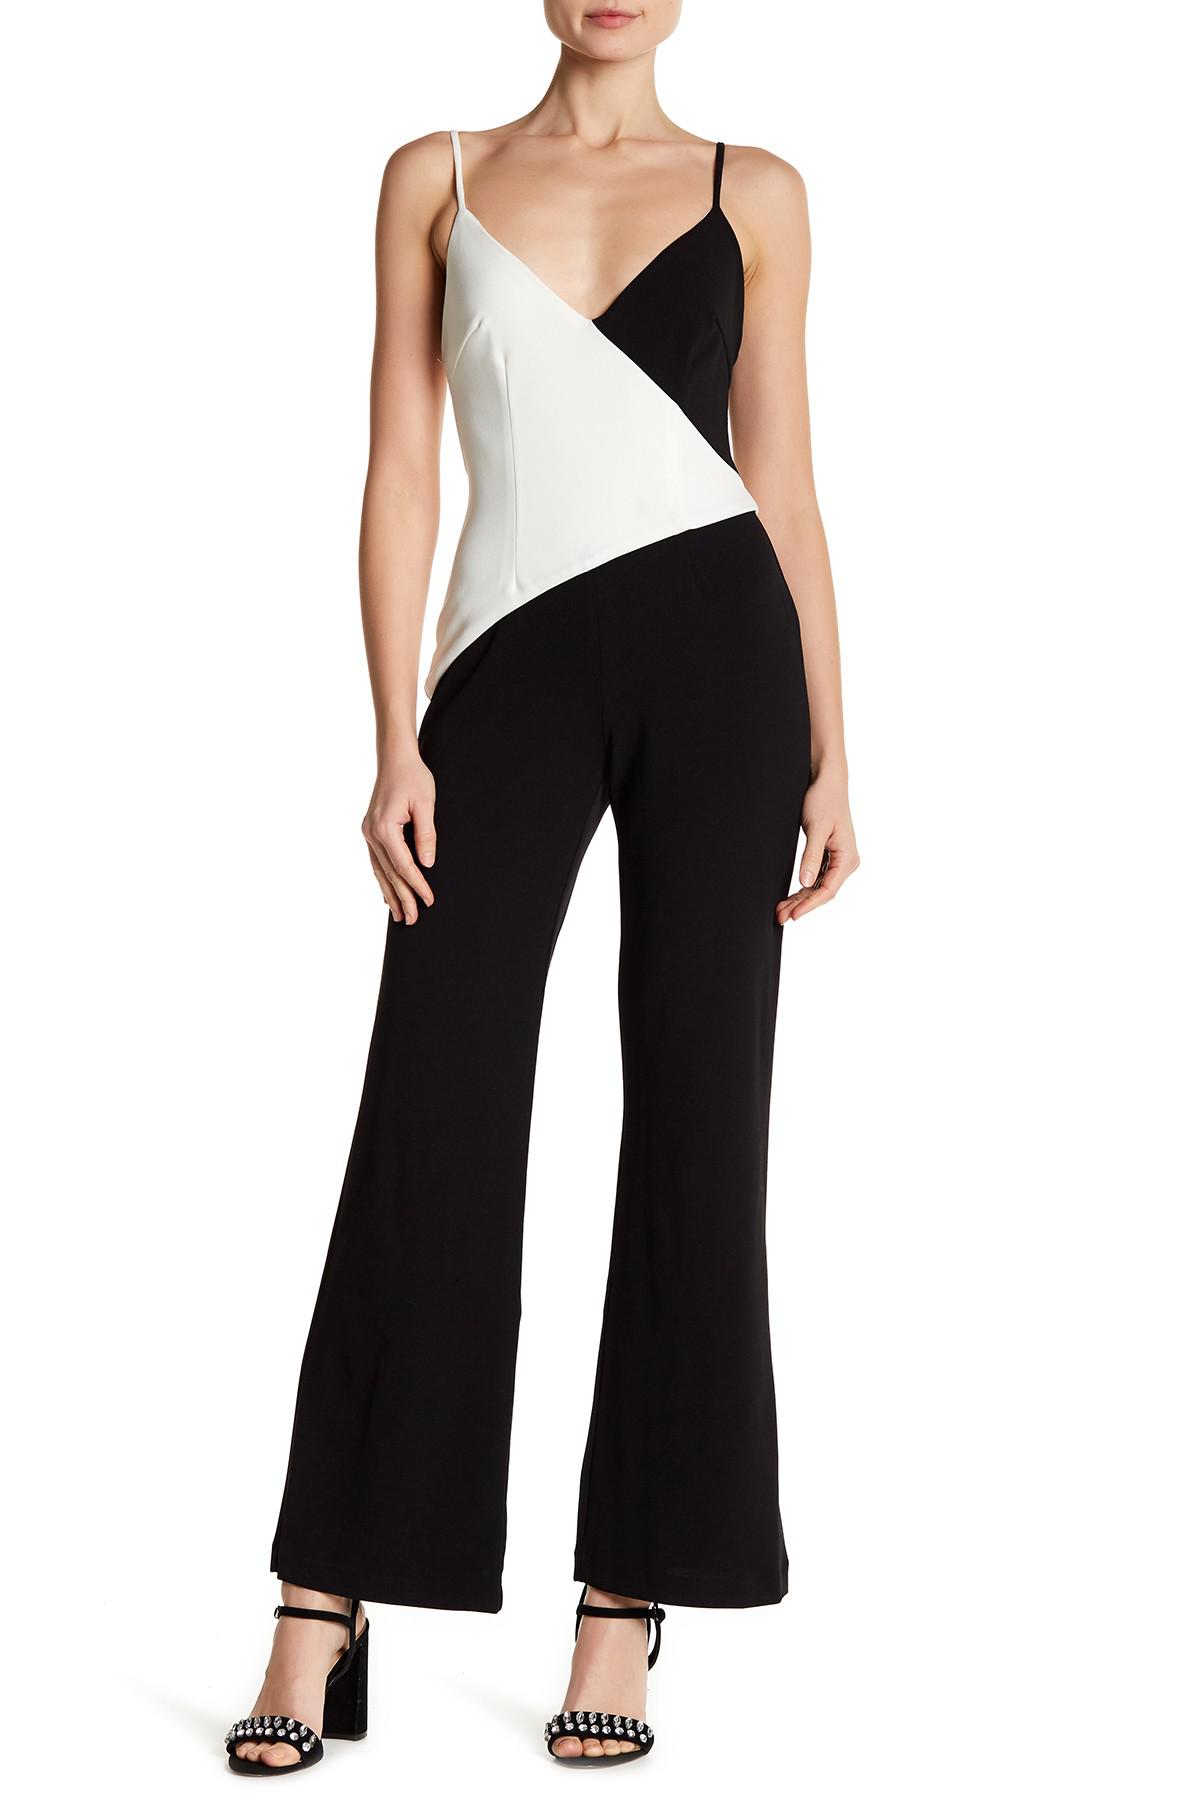 Alexia Admor Synthetic Colorblock Jumpsuit in Black - Lyst